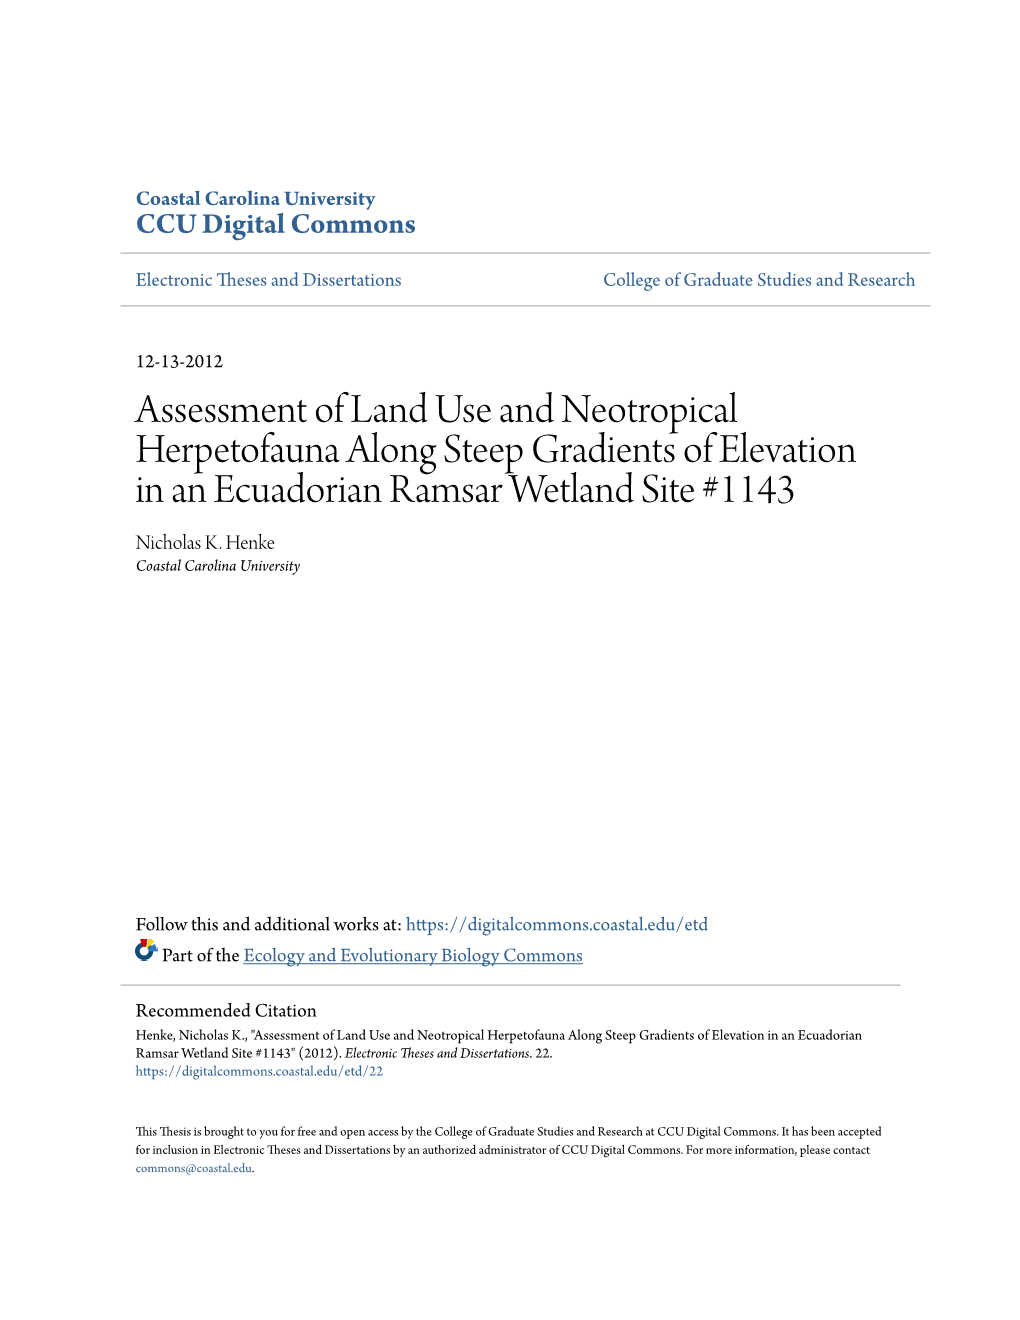 Assessment of Land Use and Neotropical Herpetofauna Along Steep Gradients of Elevation in an Ecuadorian Ramsar Wetland Site #1143 Nicholas K